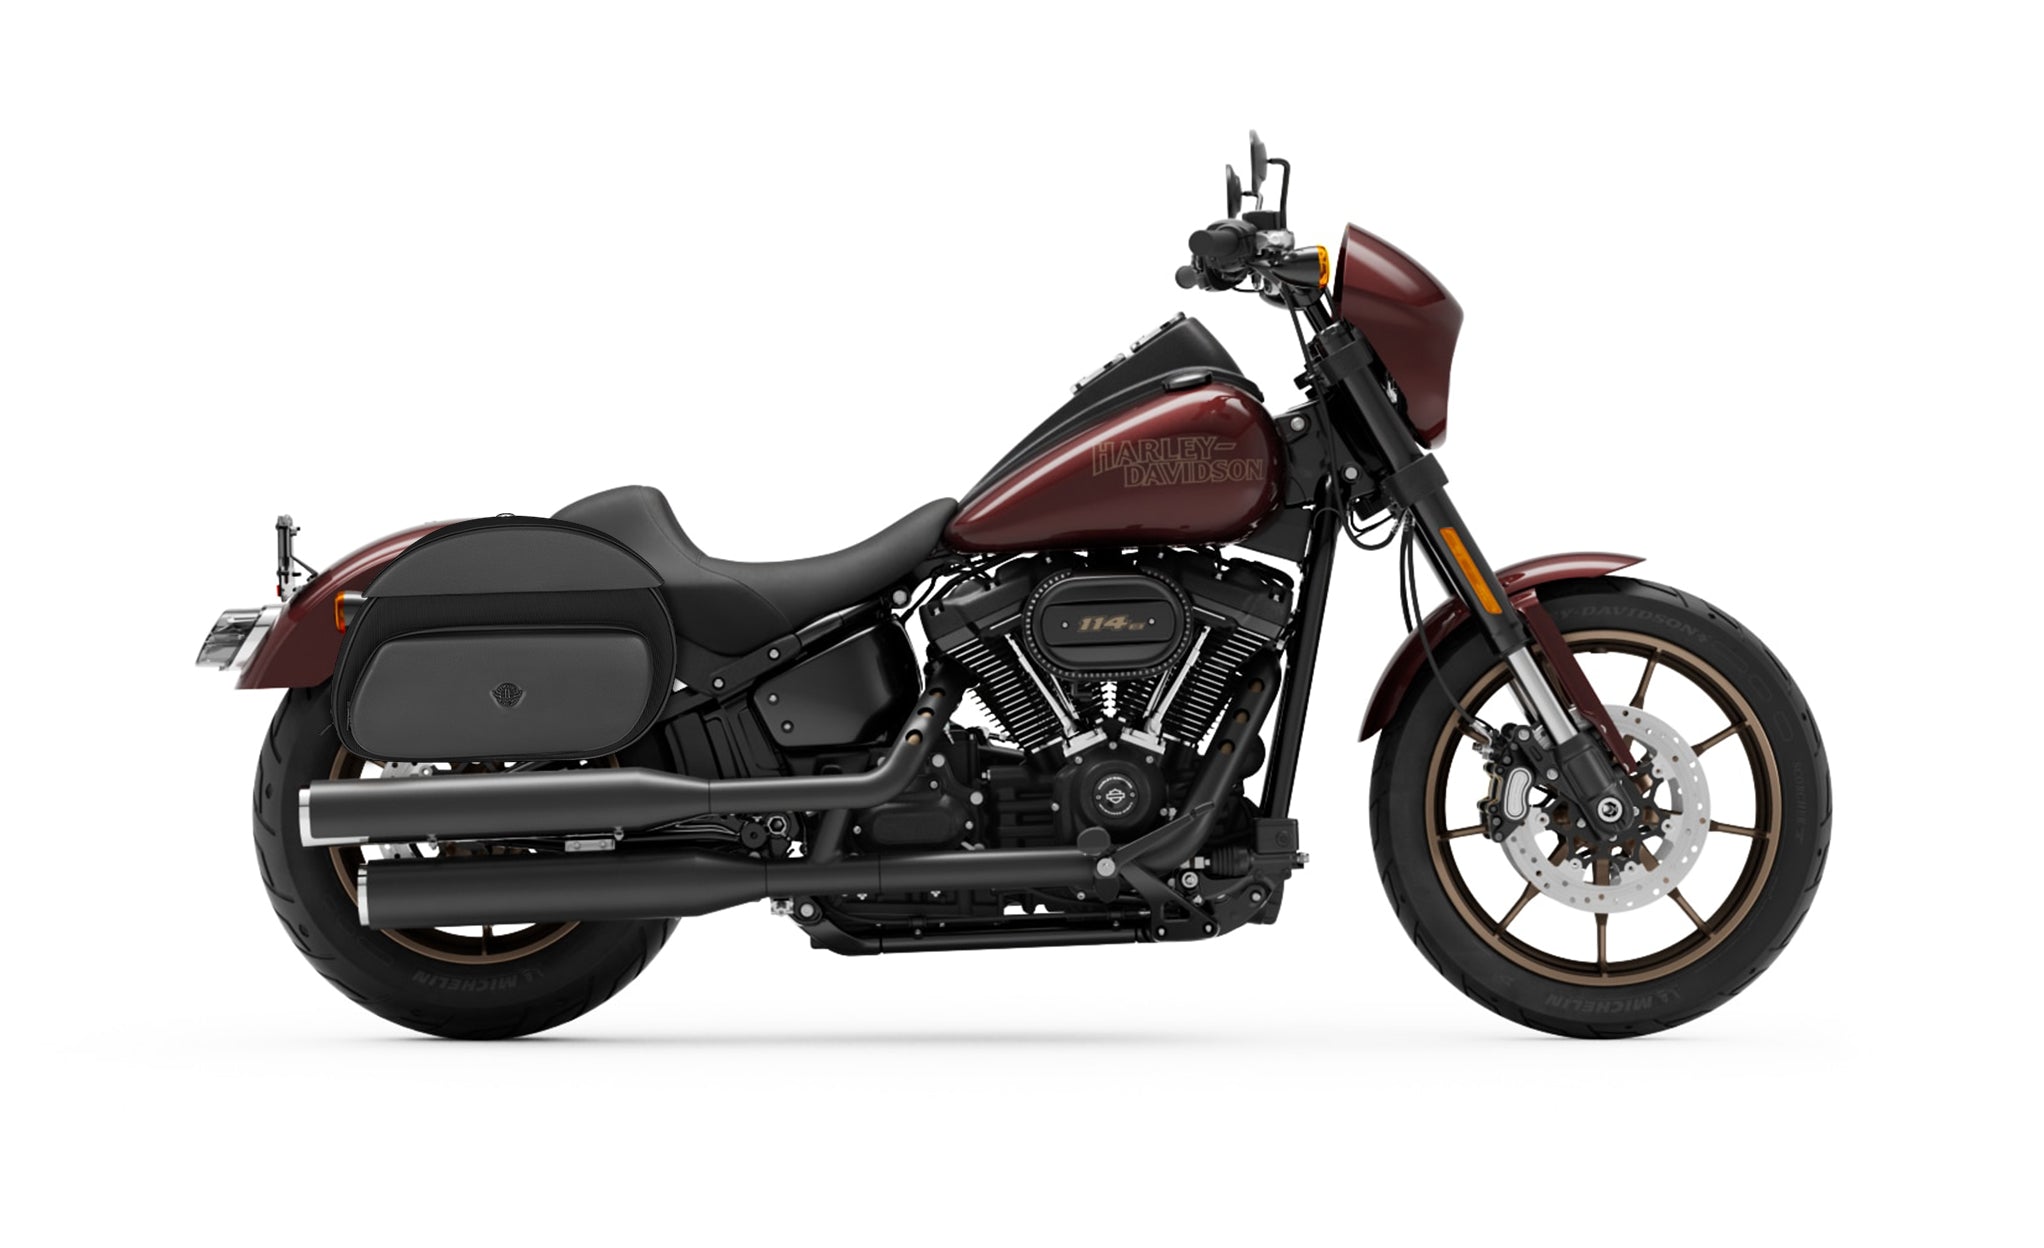 Viking Stealth Quick Mount Motorcycle Saddlebags For Harley Davidson Softail Low Rider S Fxlrs on Bike Photo @expand